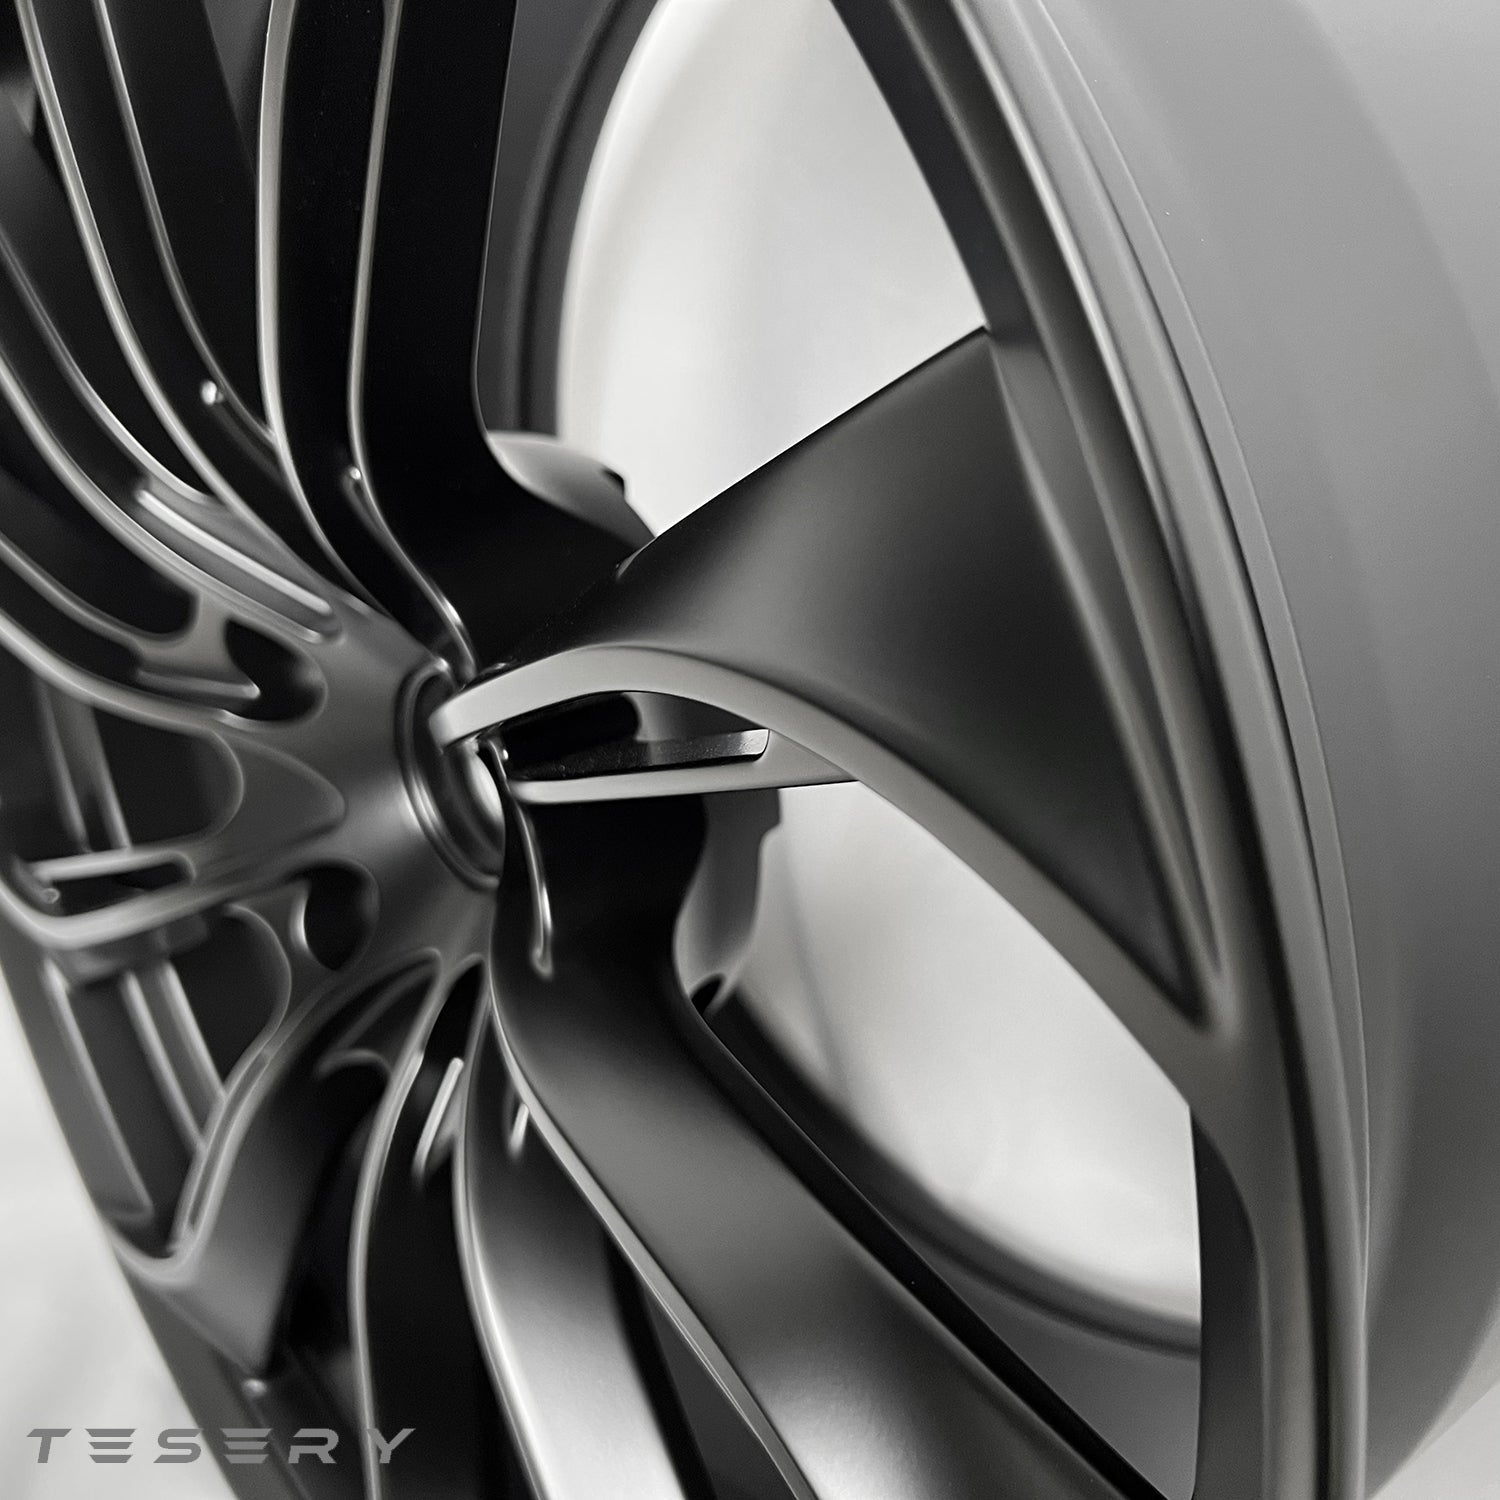 Tesla OEM factory Rims for Model 3/Y/S/X 【Style 4(Set of 4)】 - Tesery Official Store